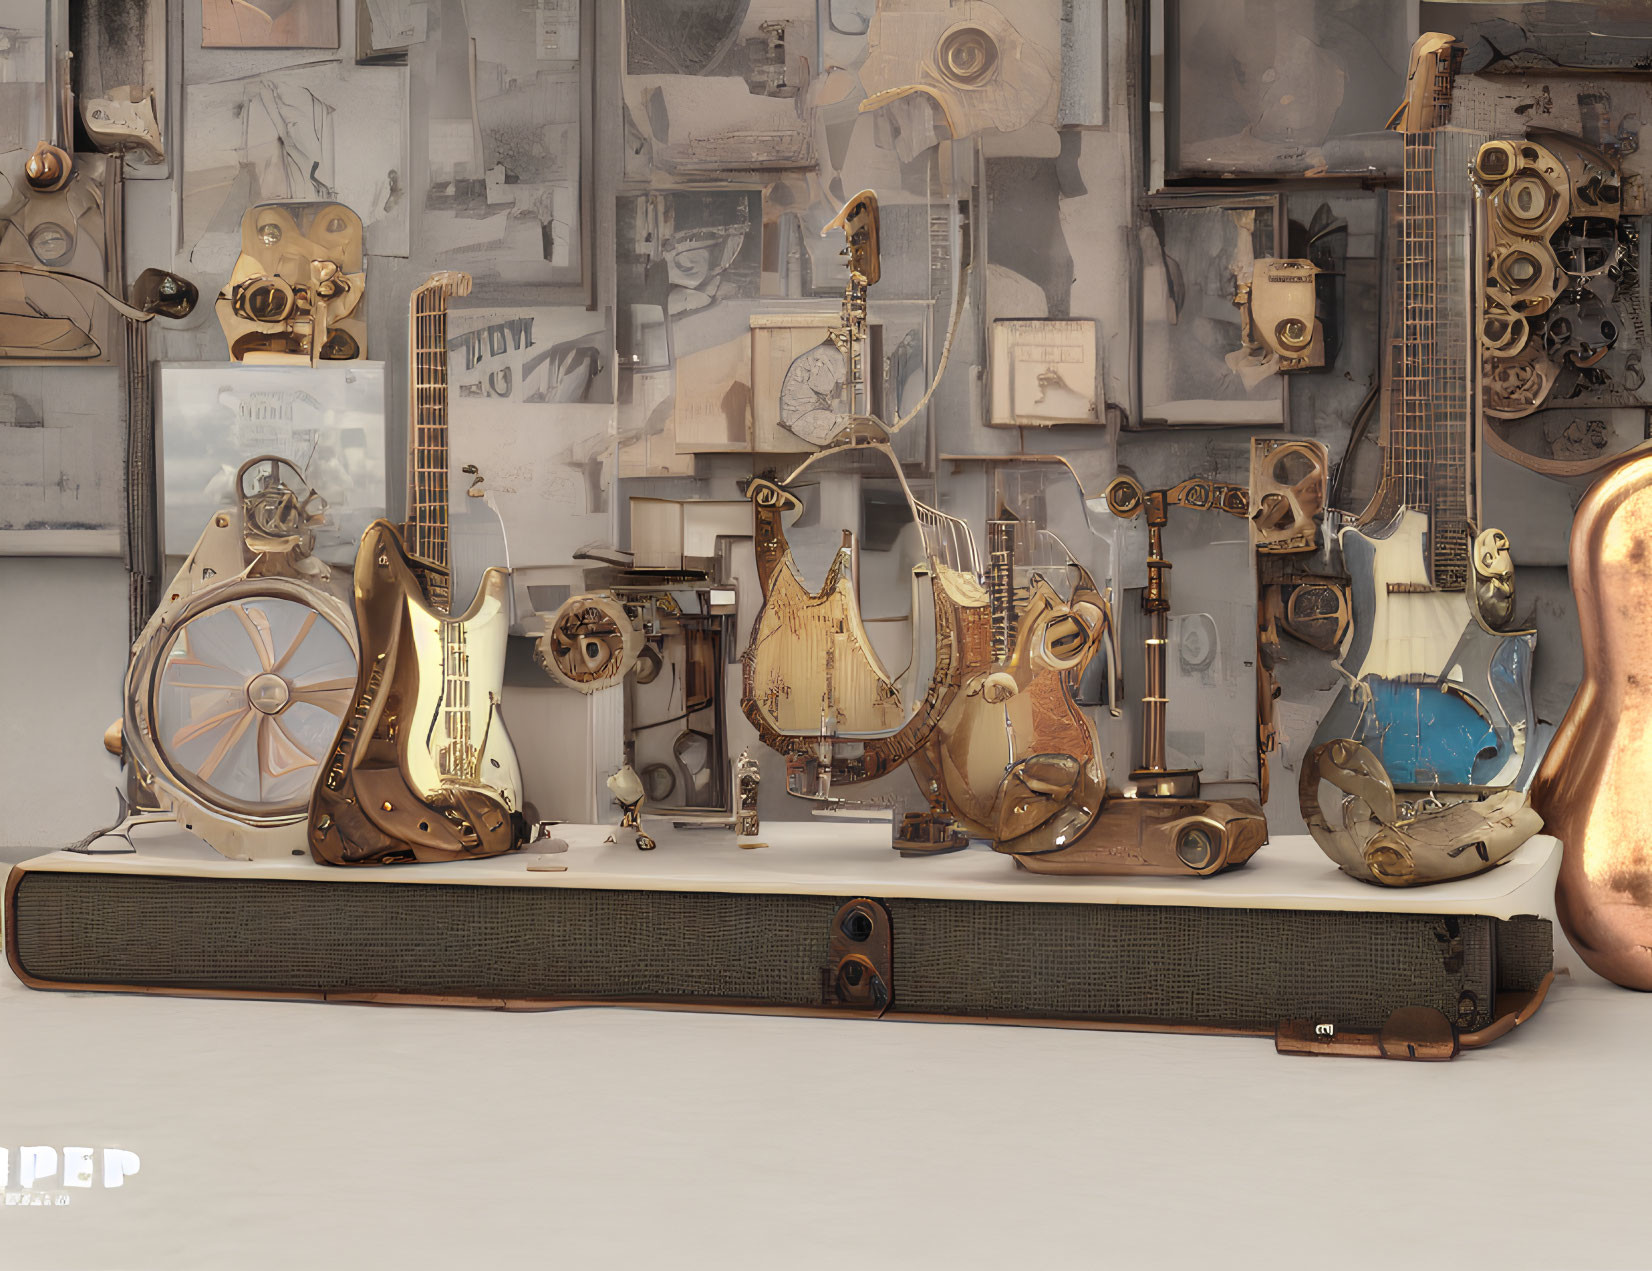 Steampunk-style letter-shaped musical instruments on display with vintage photos and mechanical parts.